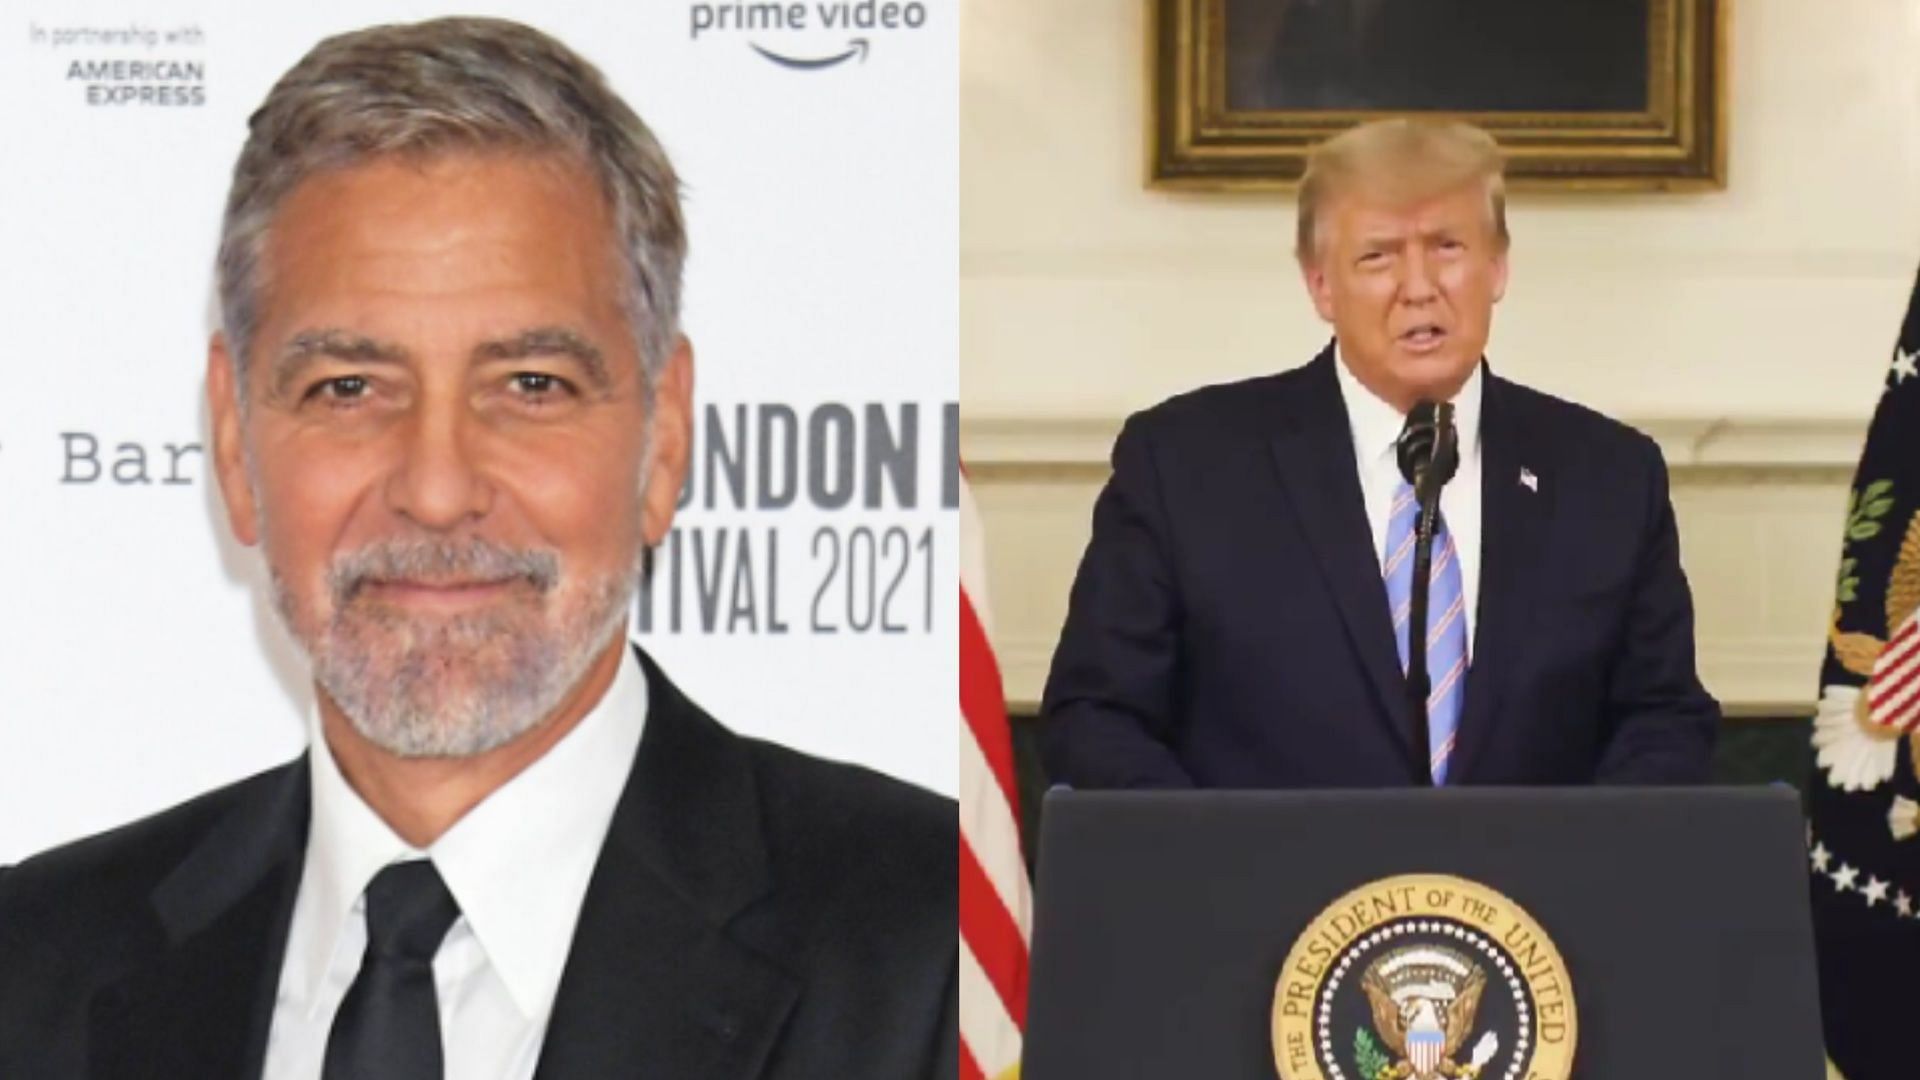 George Clooney called out Donald Trump in a 2017 interview. (Image via X/filam916/realDonaldTrump)